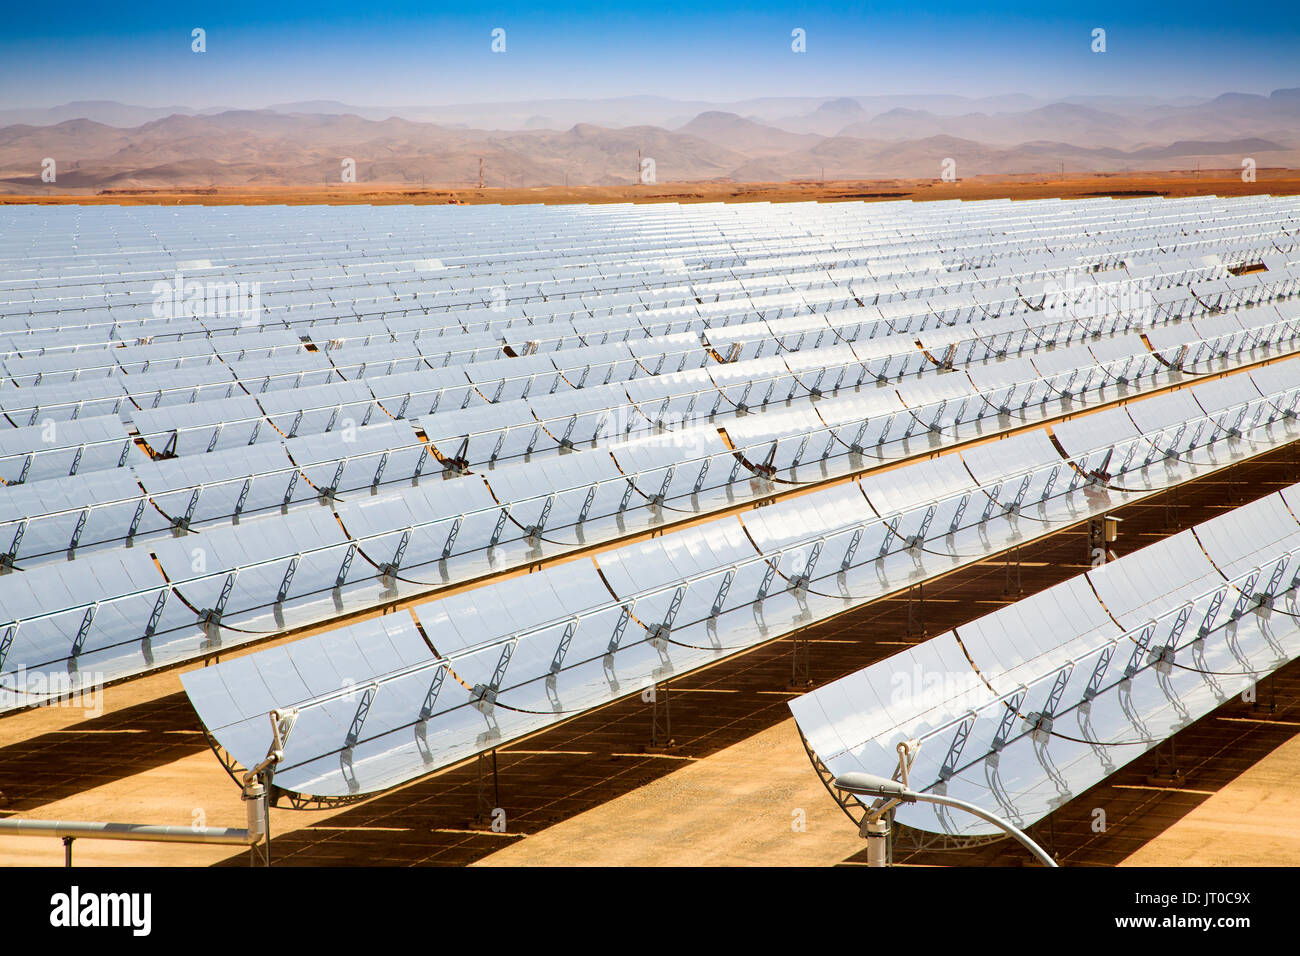 Solar thermal sustainable energy, Noor Ouarzazate Concentrated Solar Power Station Complex. Morocco, Maghreb North Africa Stock Photo